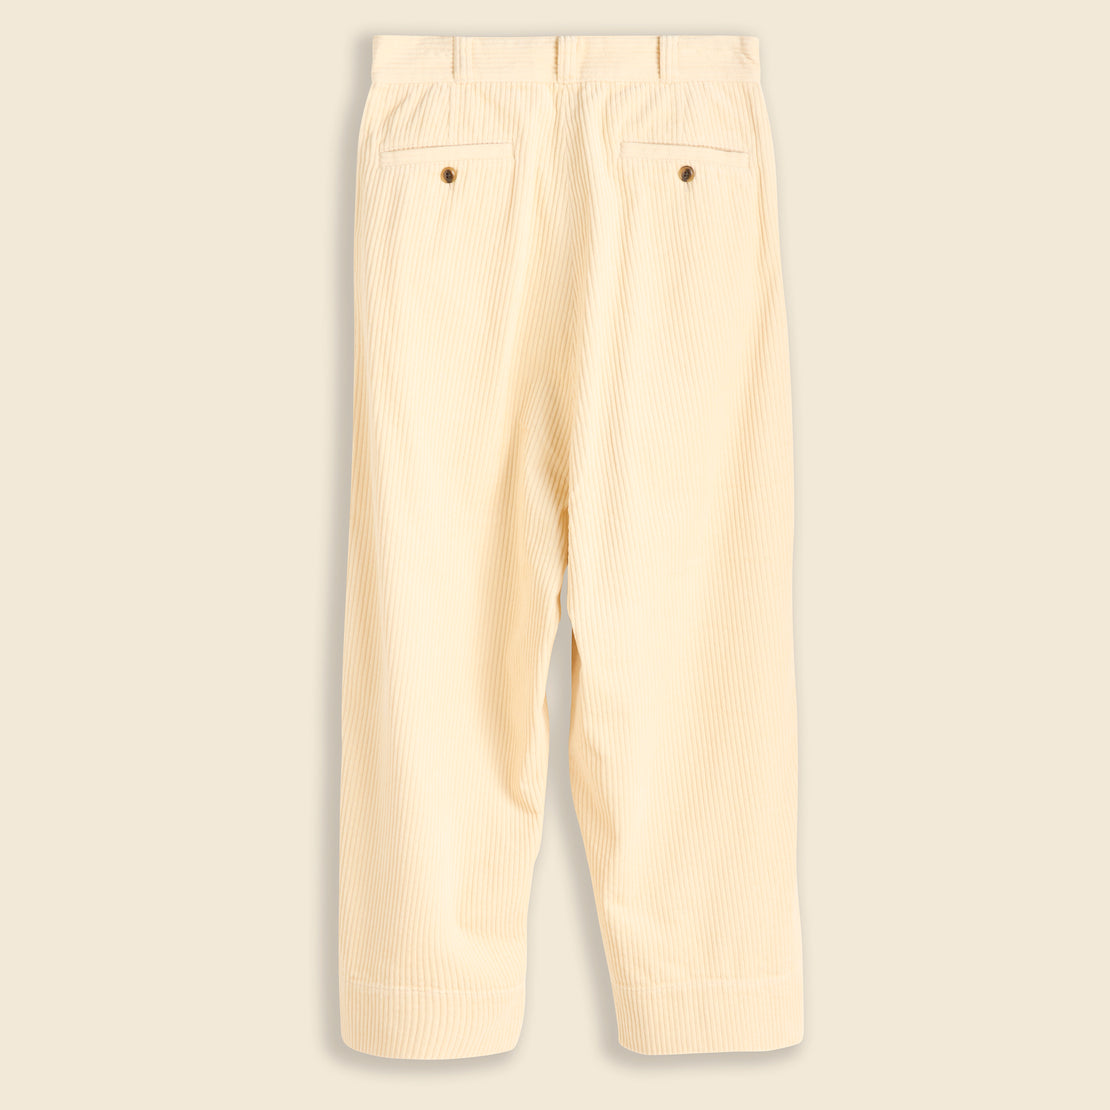 5 Wale Cropped Corduroy Pant - Ivory - BEAMS BOY - STAG Provisions - W - Pants - Twill